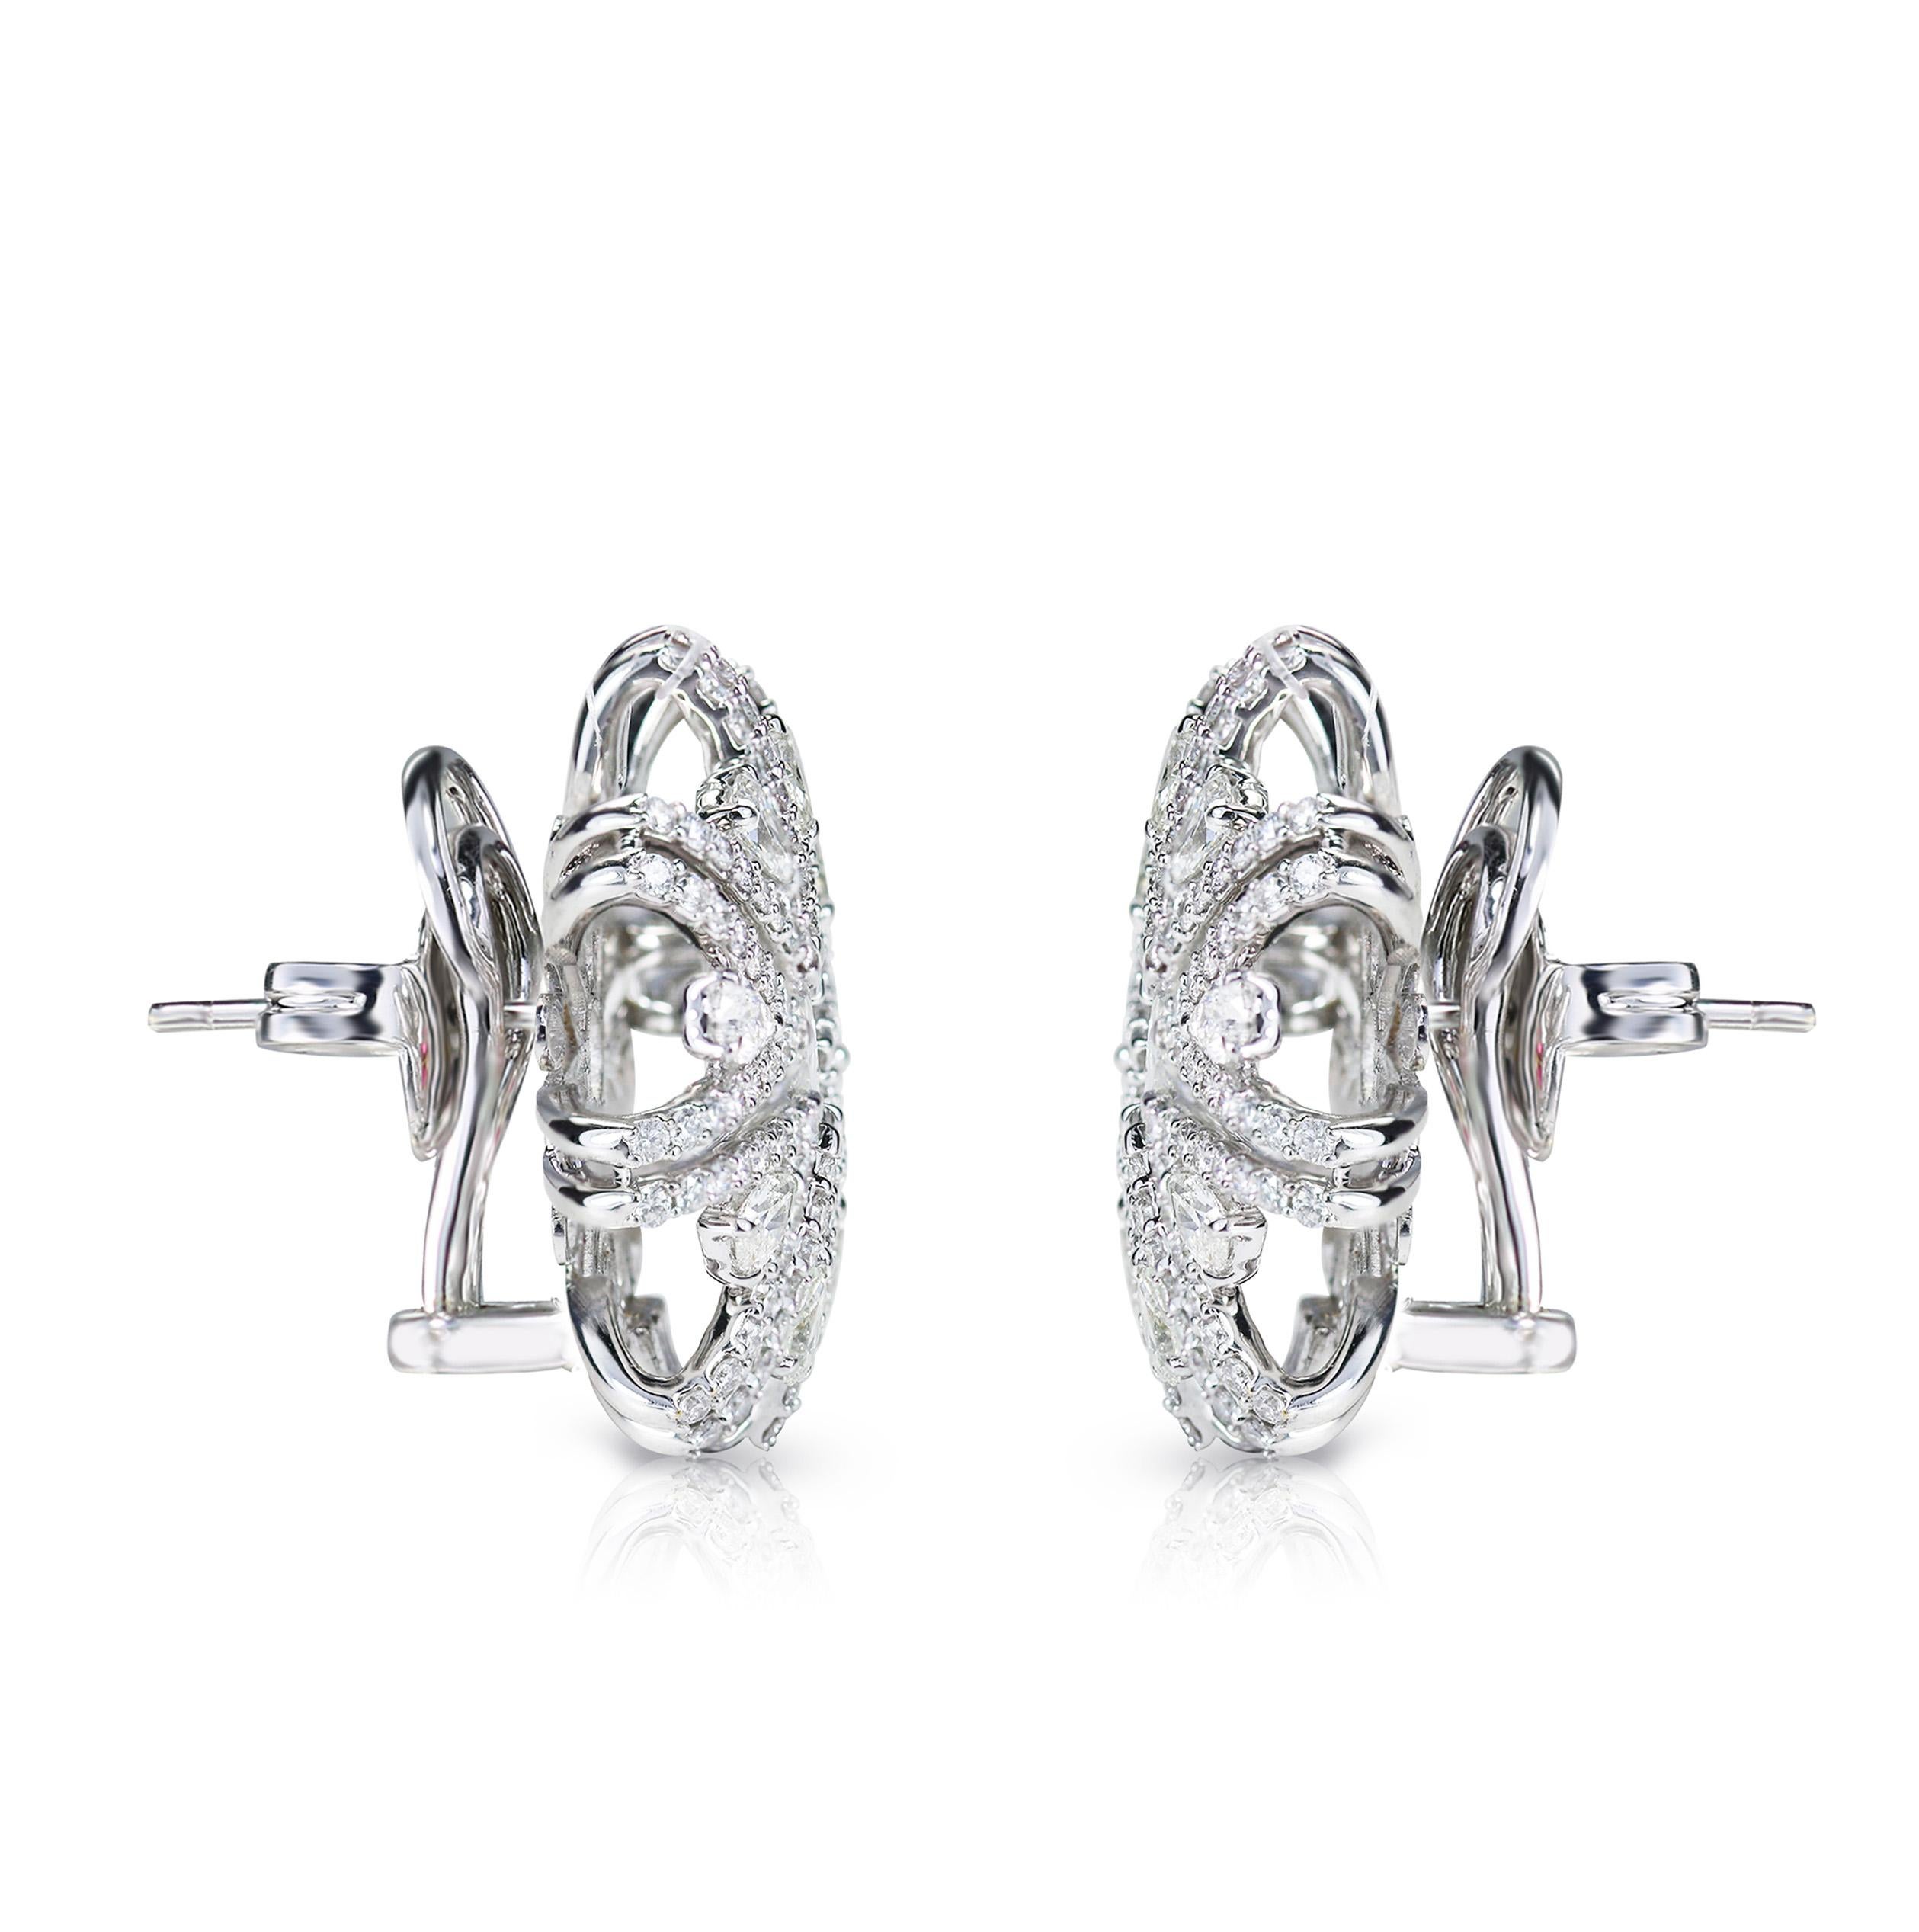 Contemporary Studio Rêves Snowflakes Stud Earrings in 18 Karat White Gold and Diamonds For Sale